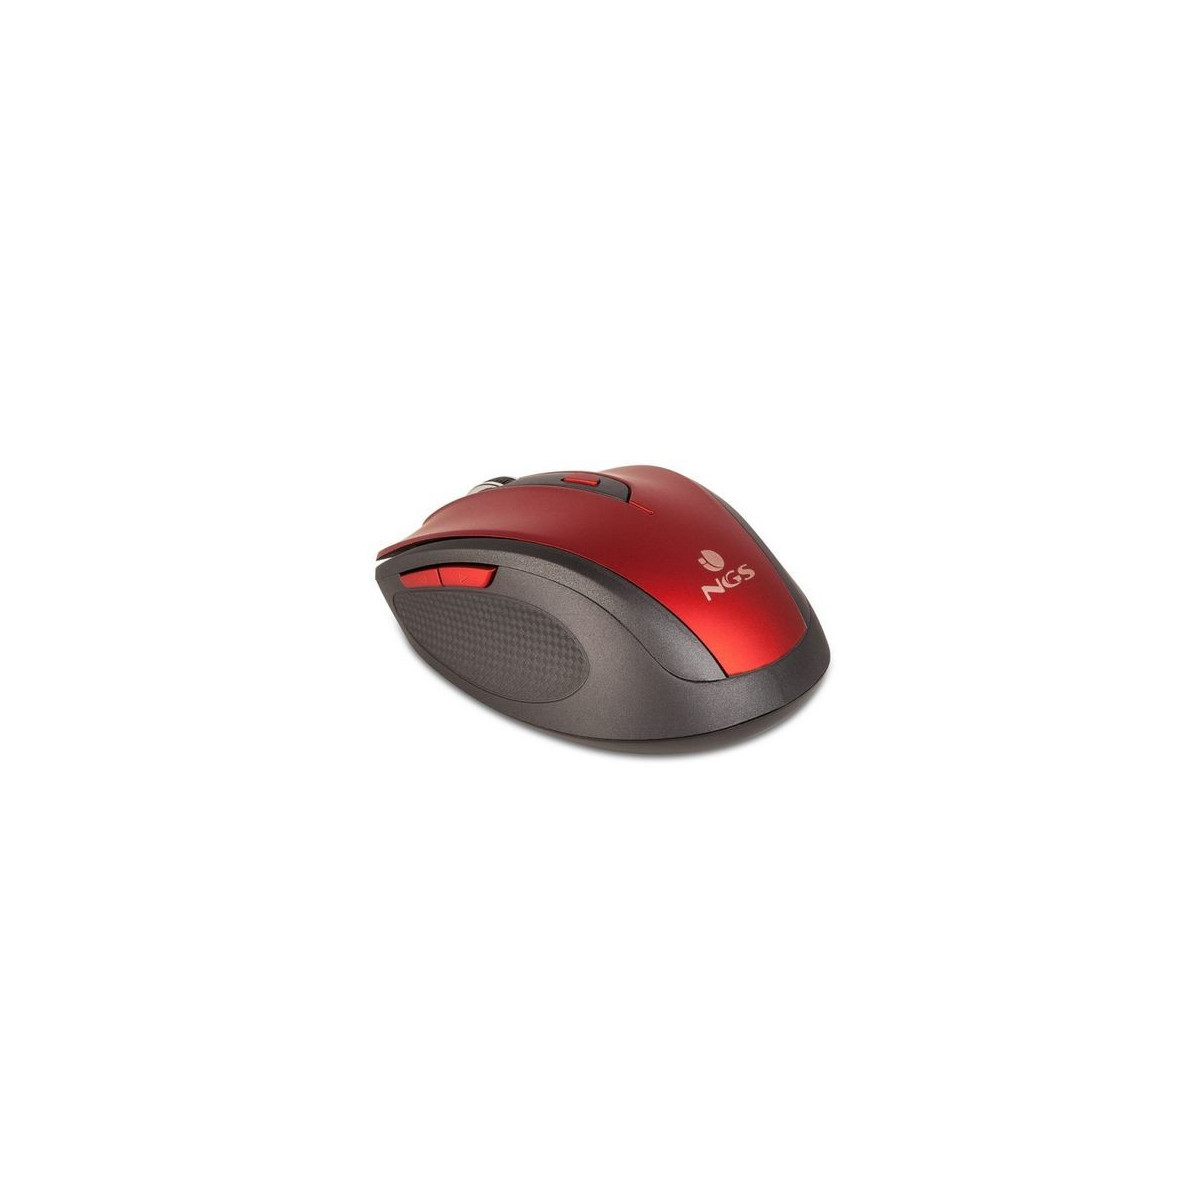 NGS Schnurlose Mouse EVOMUTERED Mouse, Rot